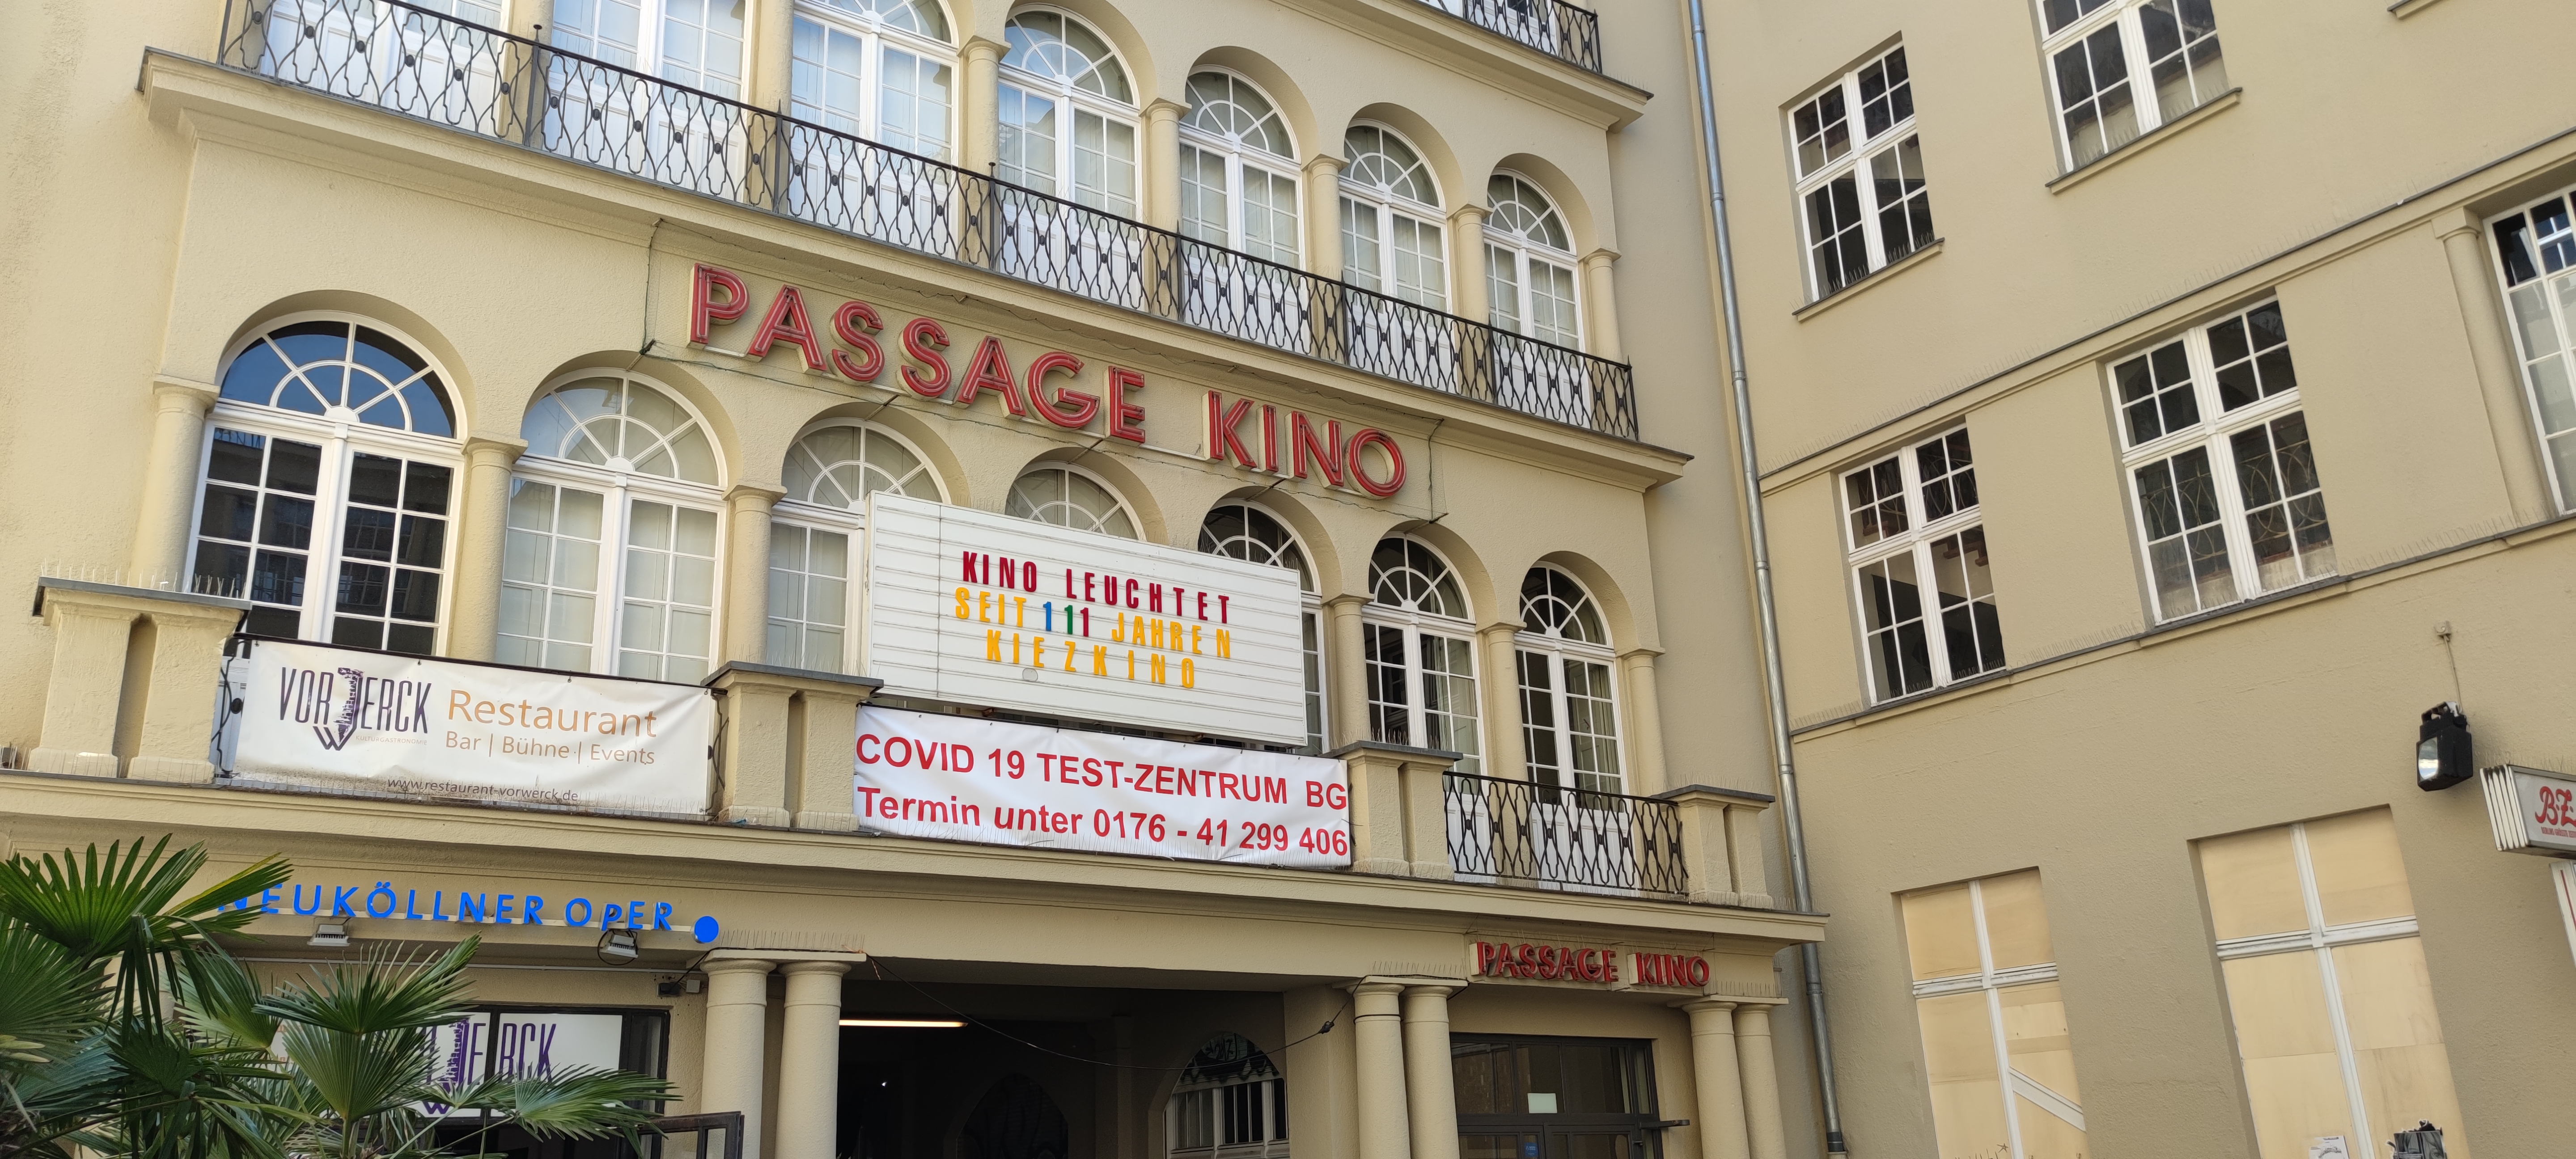 Passage Kino front during Covid pandemic